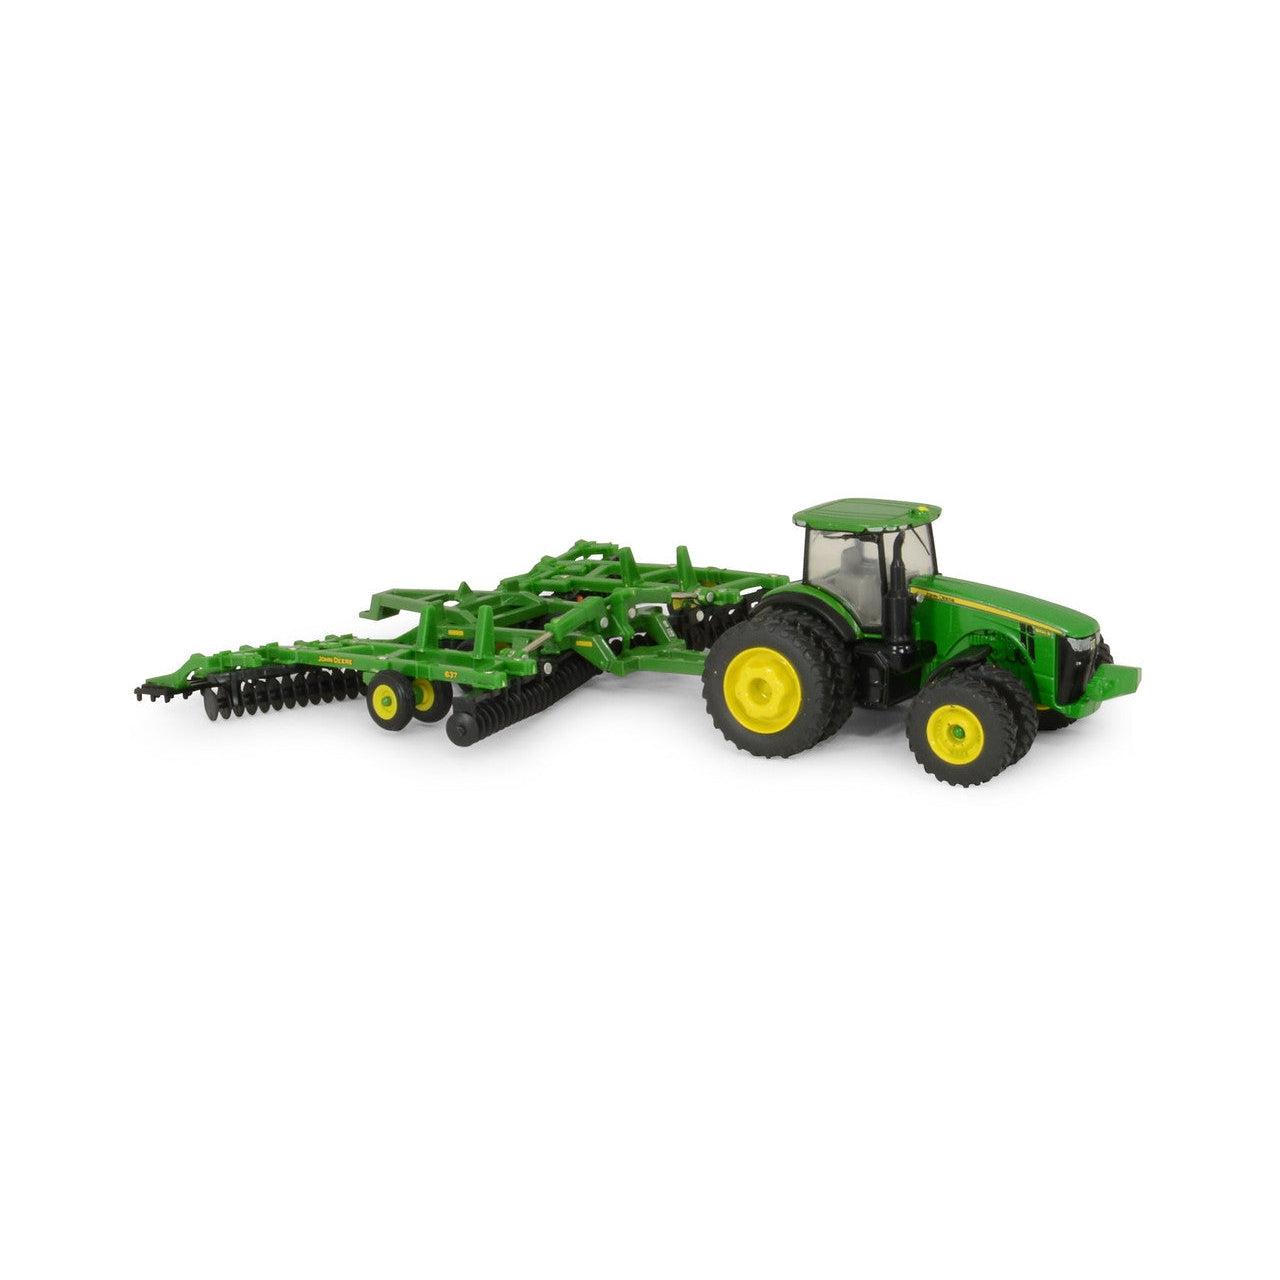 TOMY-John Deere 8320R Tractor with JD 637 Disk-45479V-Legacy Toys